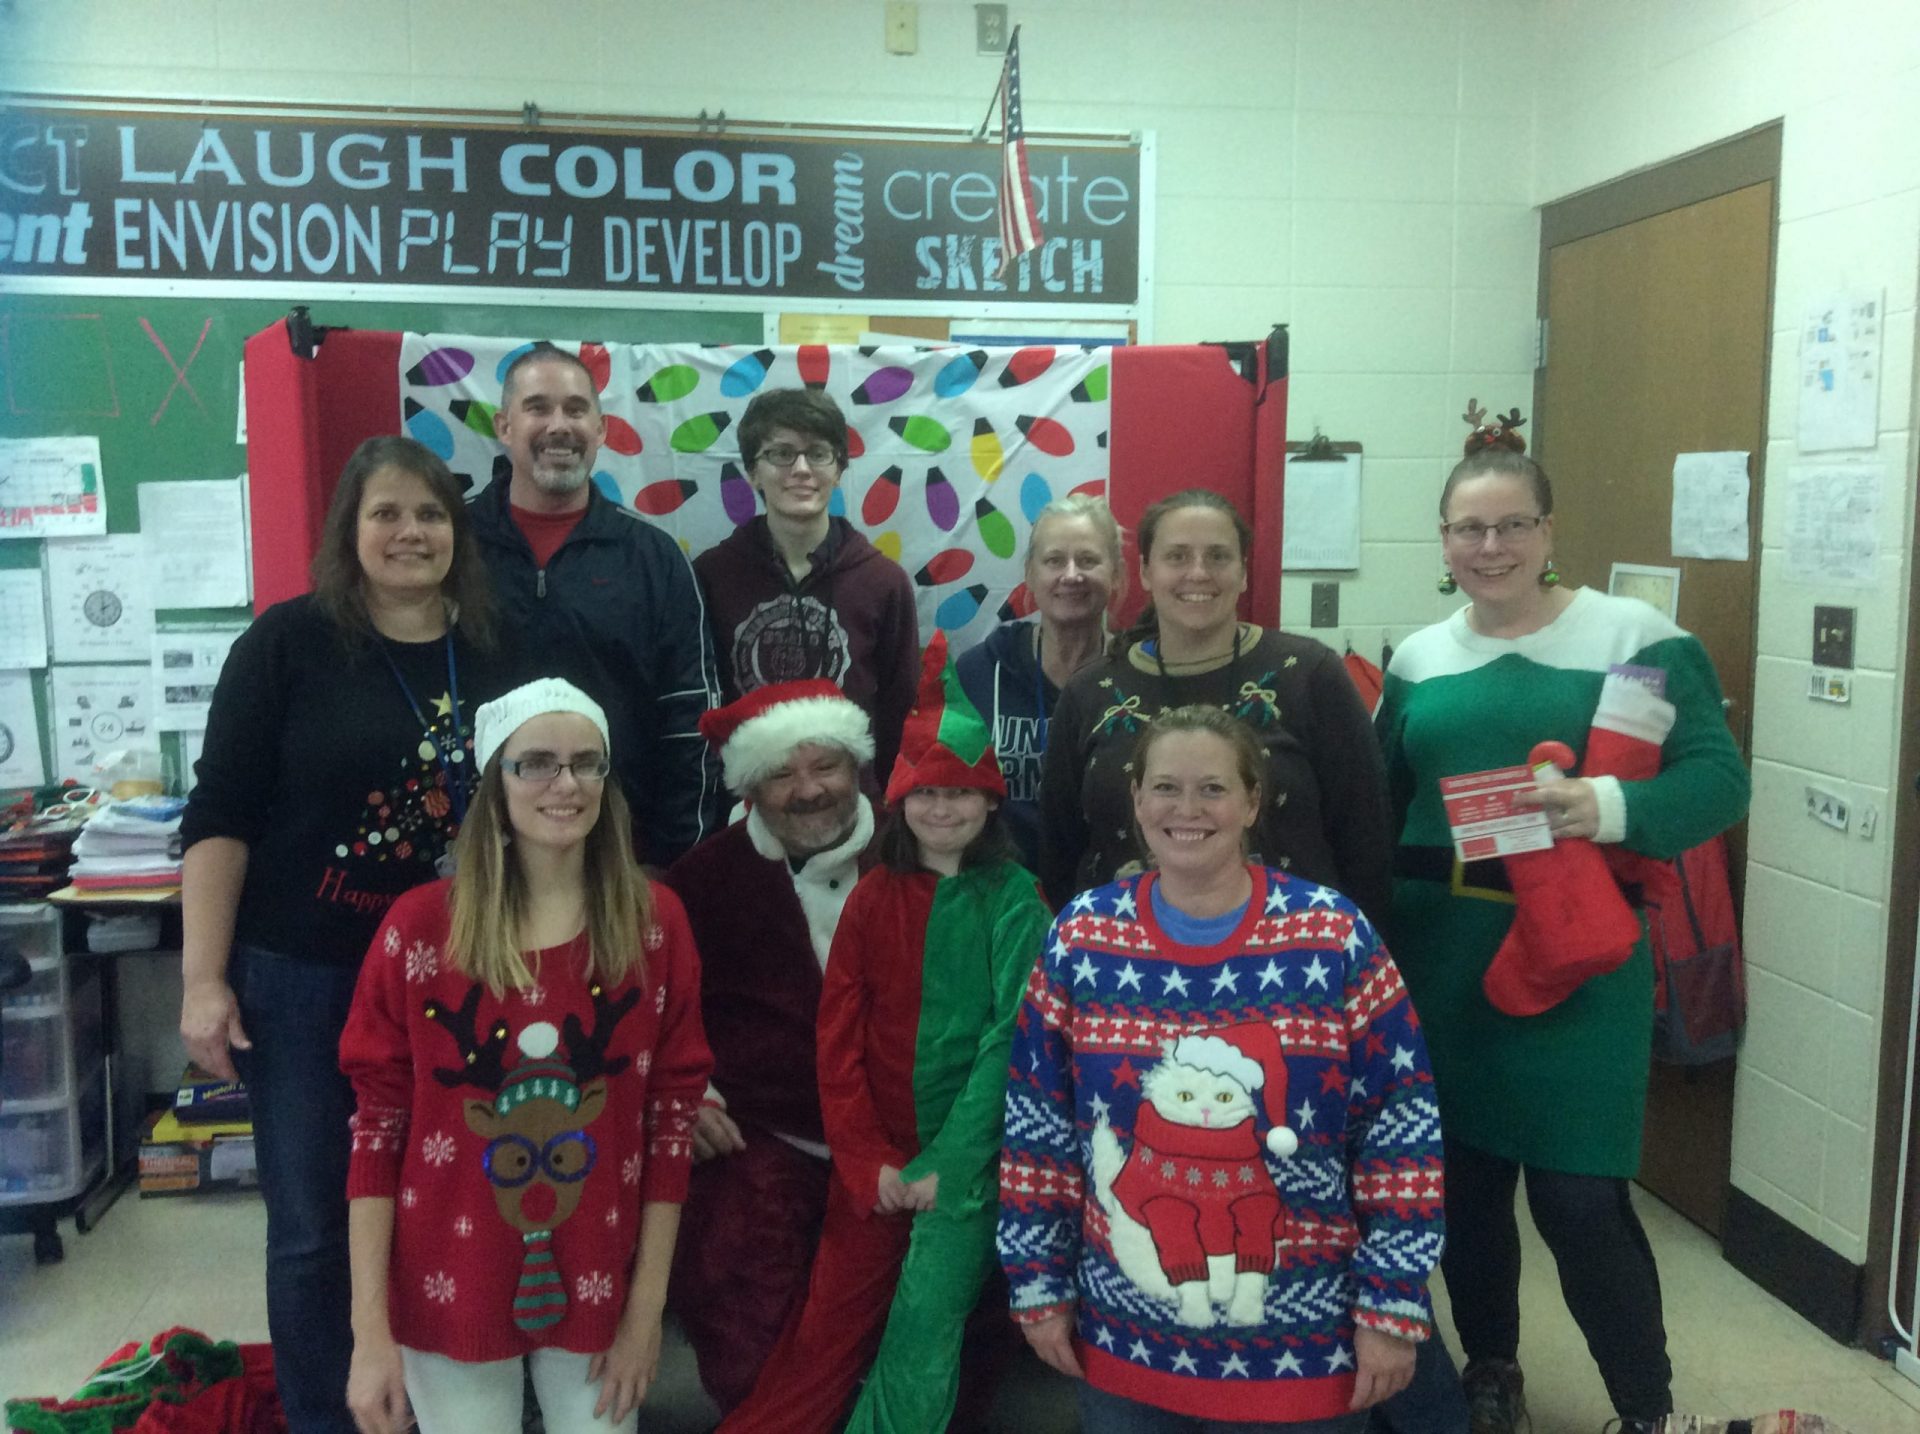 Ms. Lawson and staff (along with Santa and an elf)